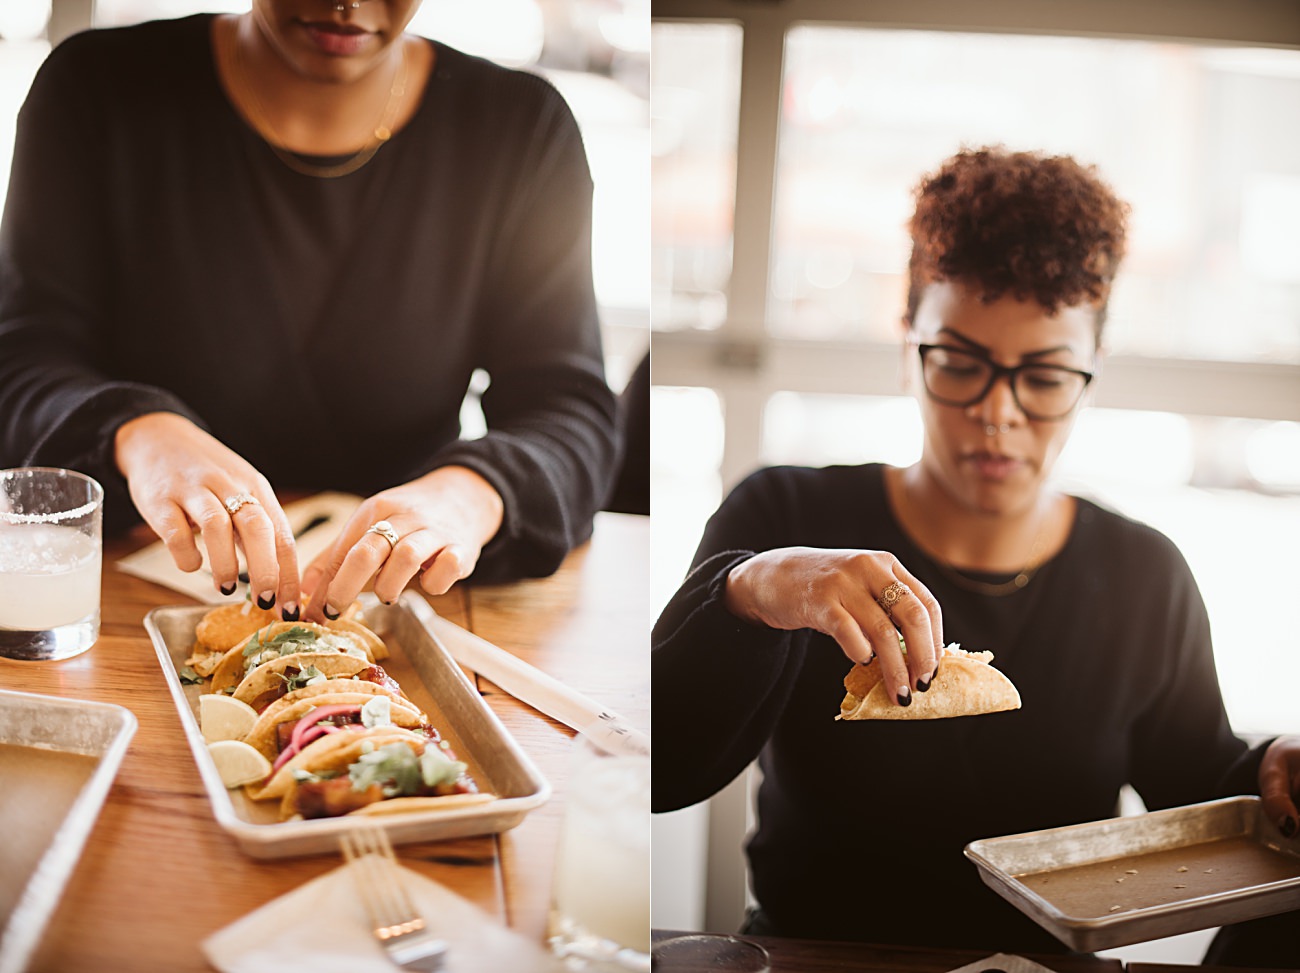 Branding Session with Tacos, Madison Wisconsin Branding Photographer